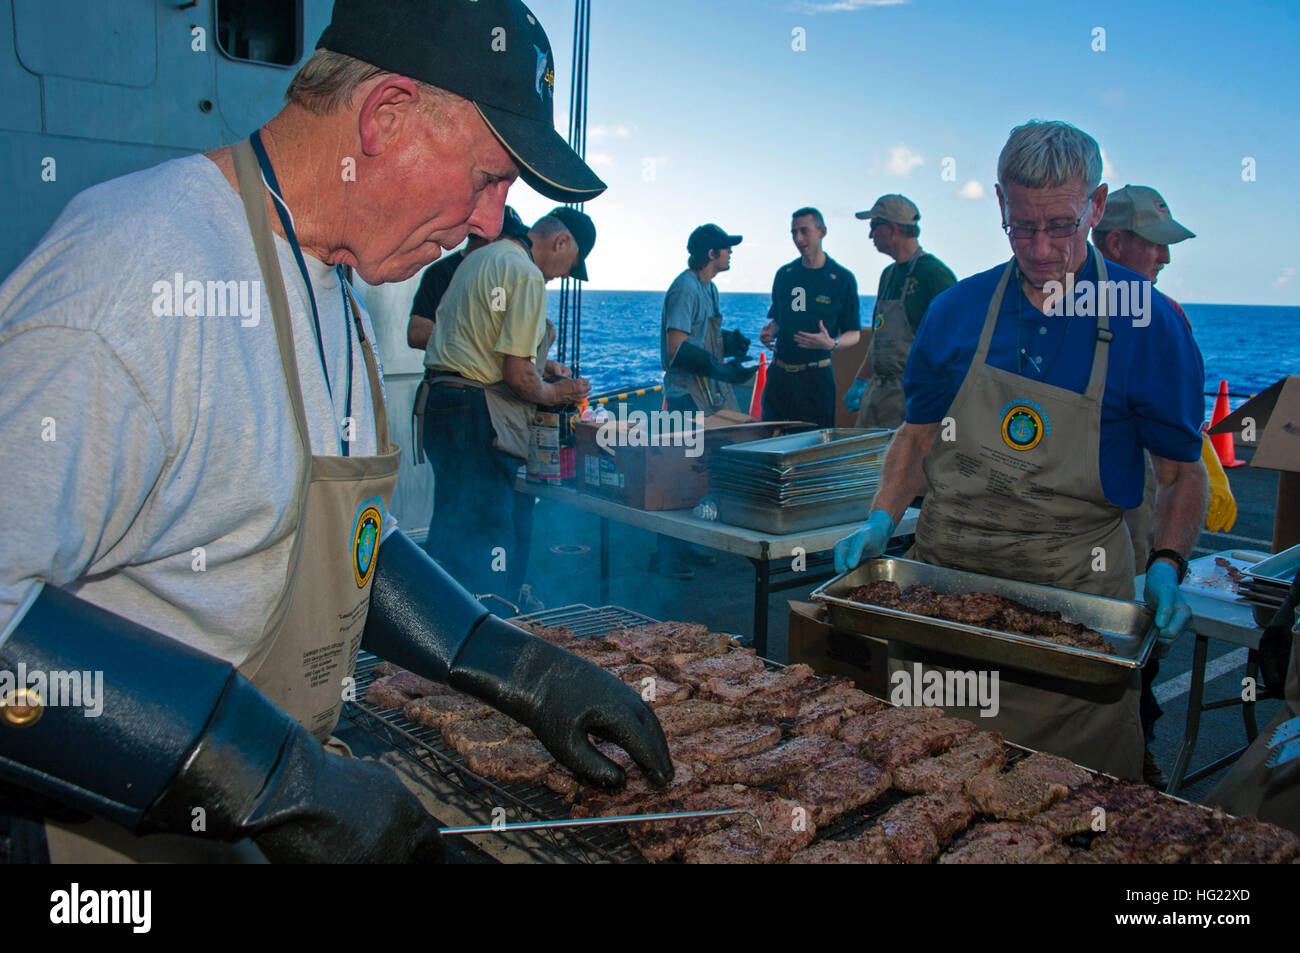 Cooks from the Valley volunteers cook steaks for Sailors stationed aboard the Nimitz-class aircraft carrier USS George Washington (CVN 73). The Cooks from the Valley is a diverse group of businessmen and women who, since 2001, have delivered approximately 53 tons of Harris Ranch, 12oz New York steaks to more than 140,000 Sailors and Marines around the world. (U.S. Navy photo by Mass Communication Specialist Seaman Loni Mae Lopez/Released) USS George Washington operations 141106-N-ZK360-188 Stock Photo